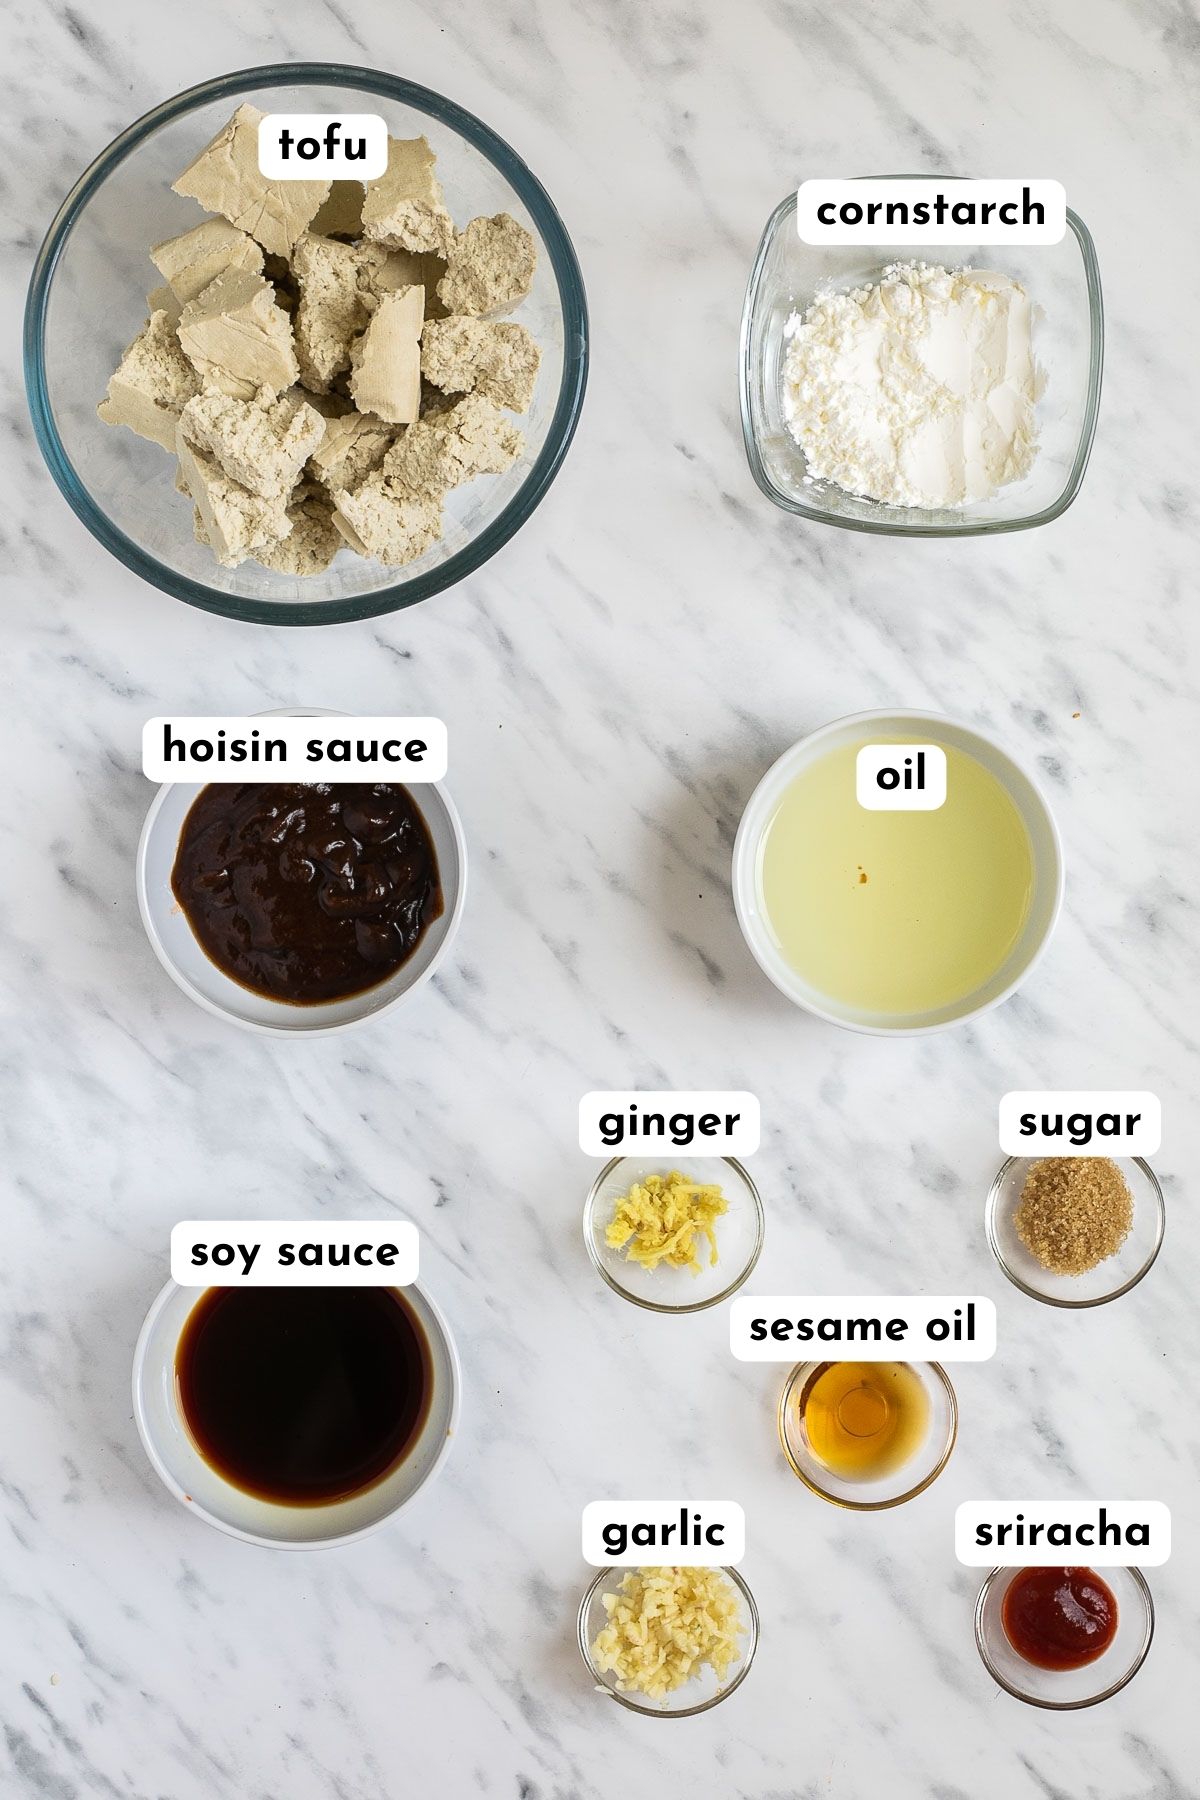 The ingredients of hoisin tofu in small glass bowls like oil, soy sauce, hoisin sauce, grated ginger, sugar, starch and torn tofu pieces